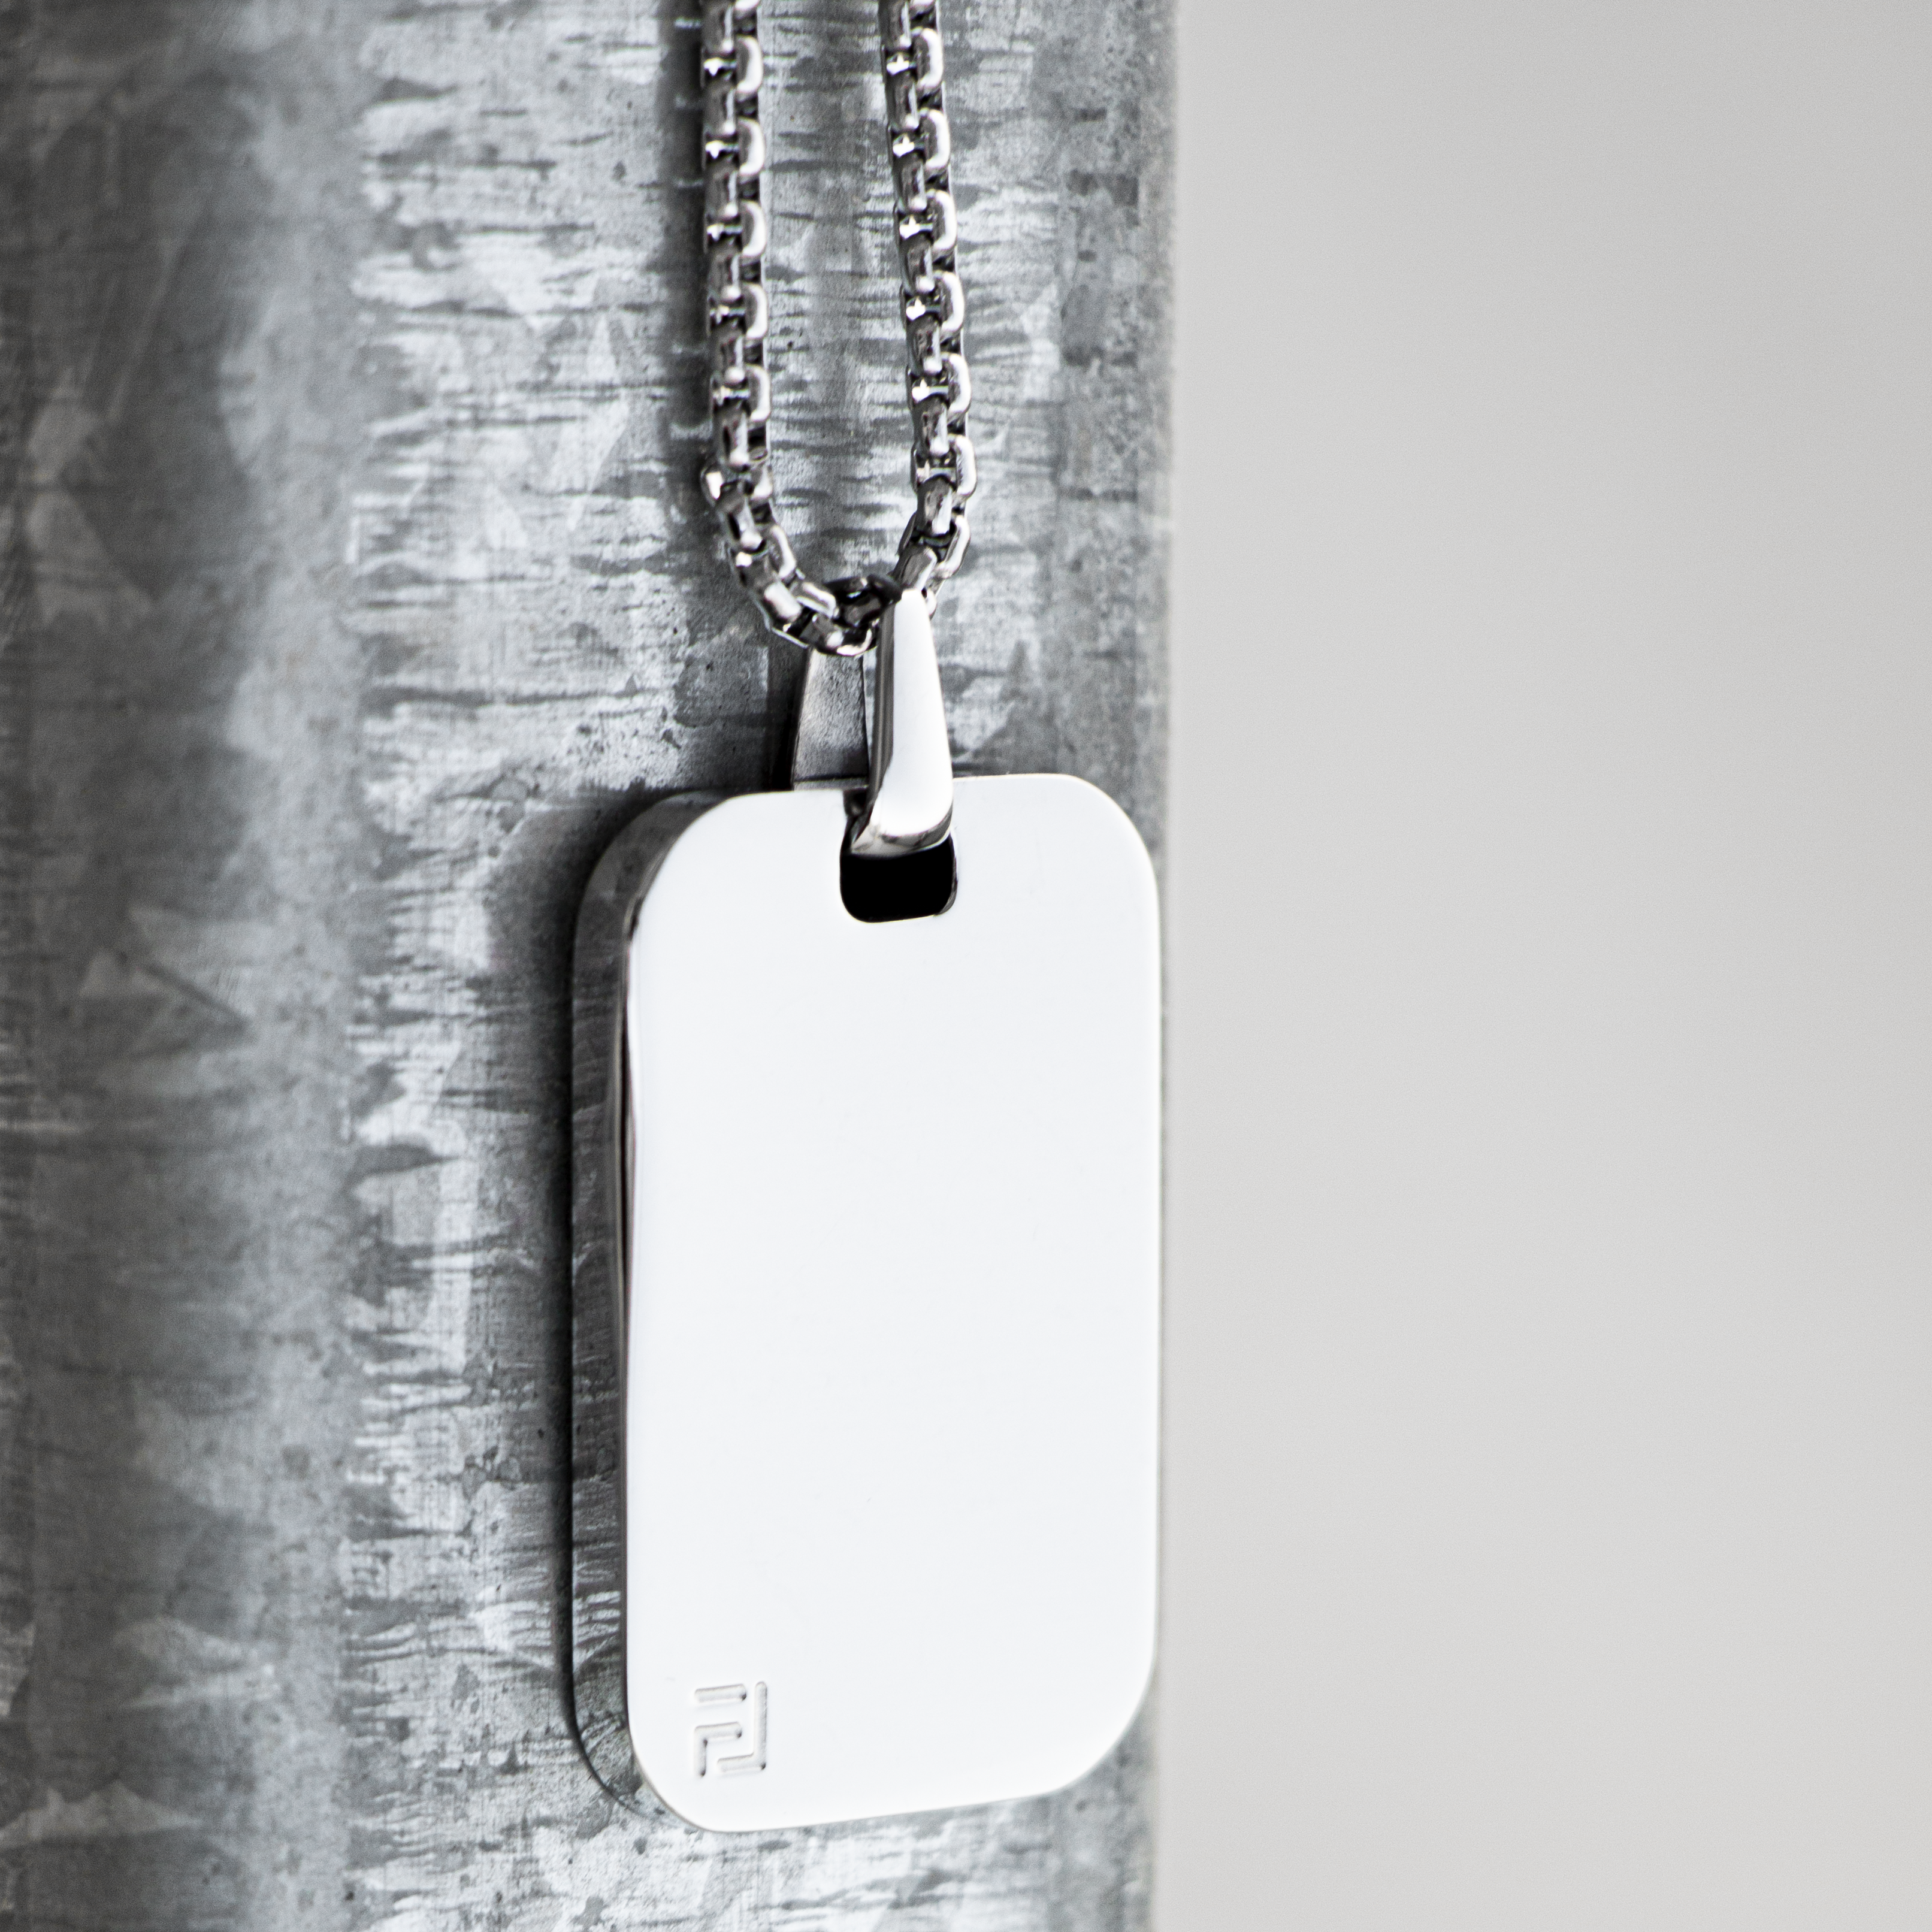 Classic ID Necklace in Silver